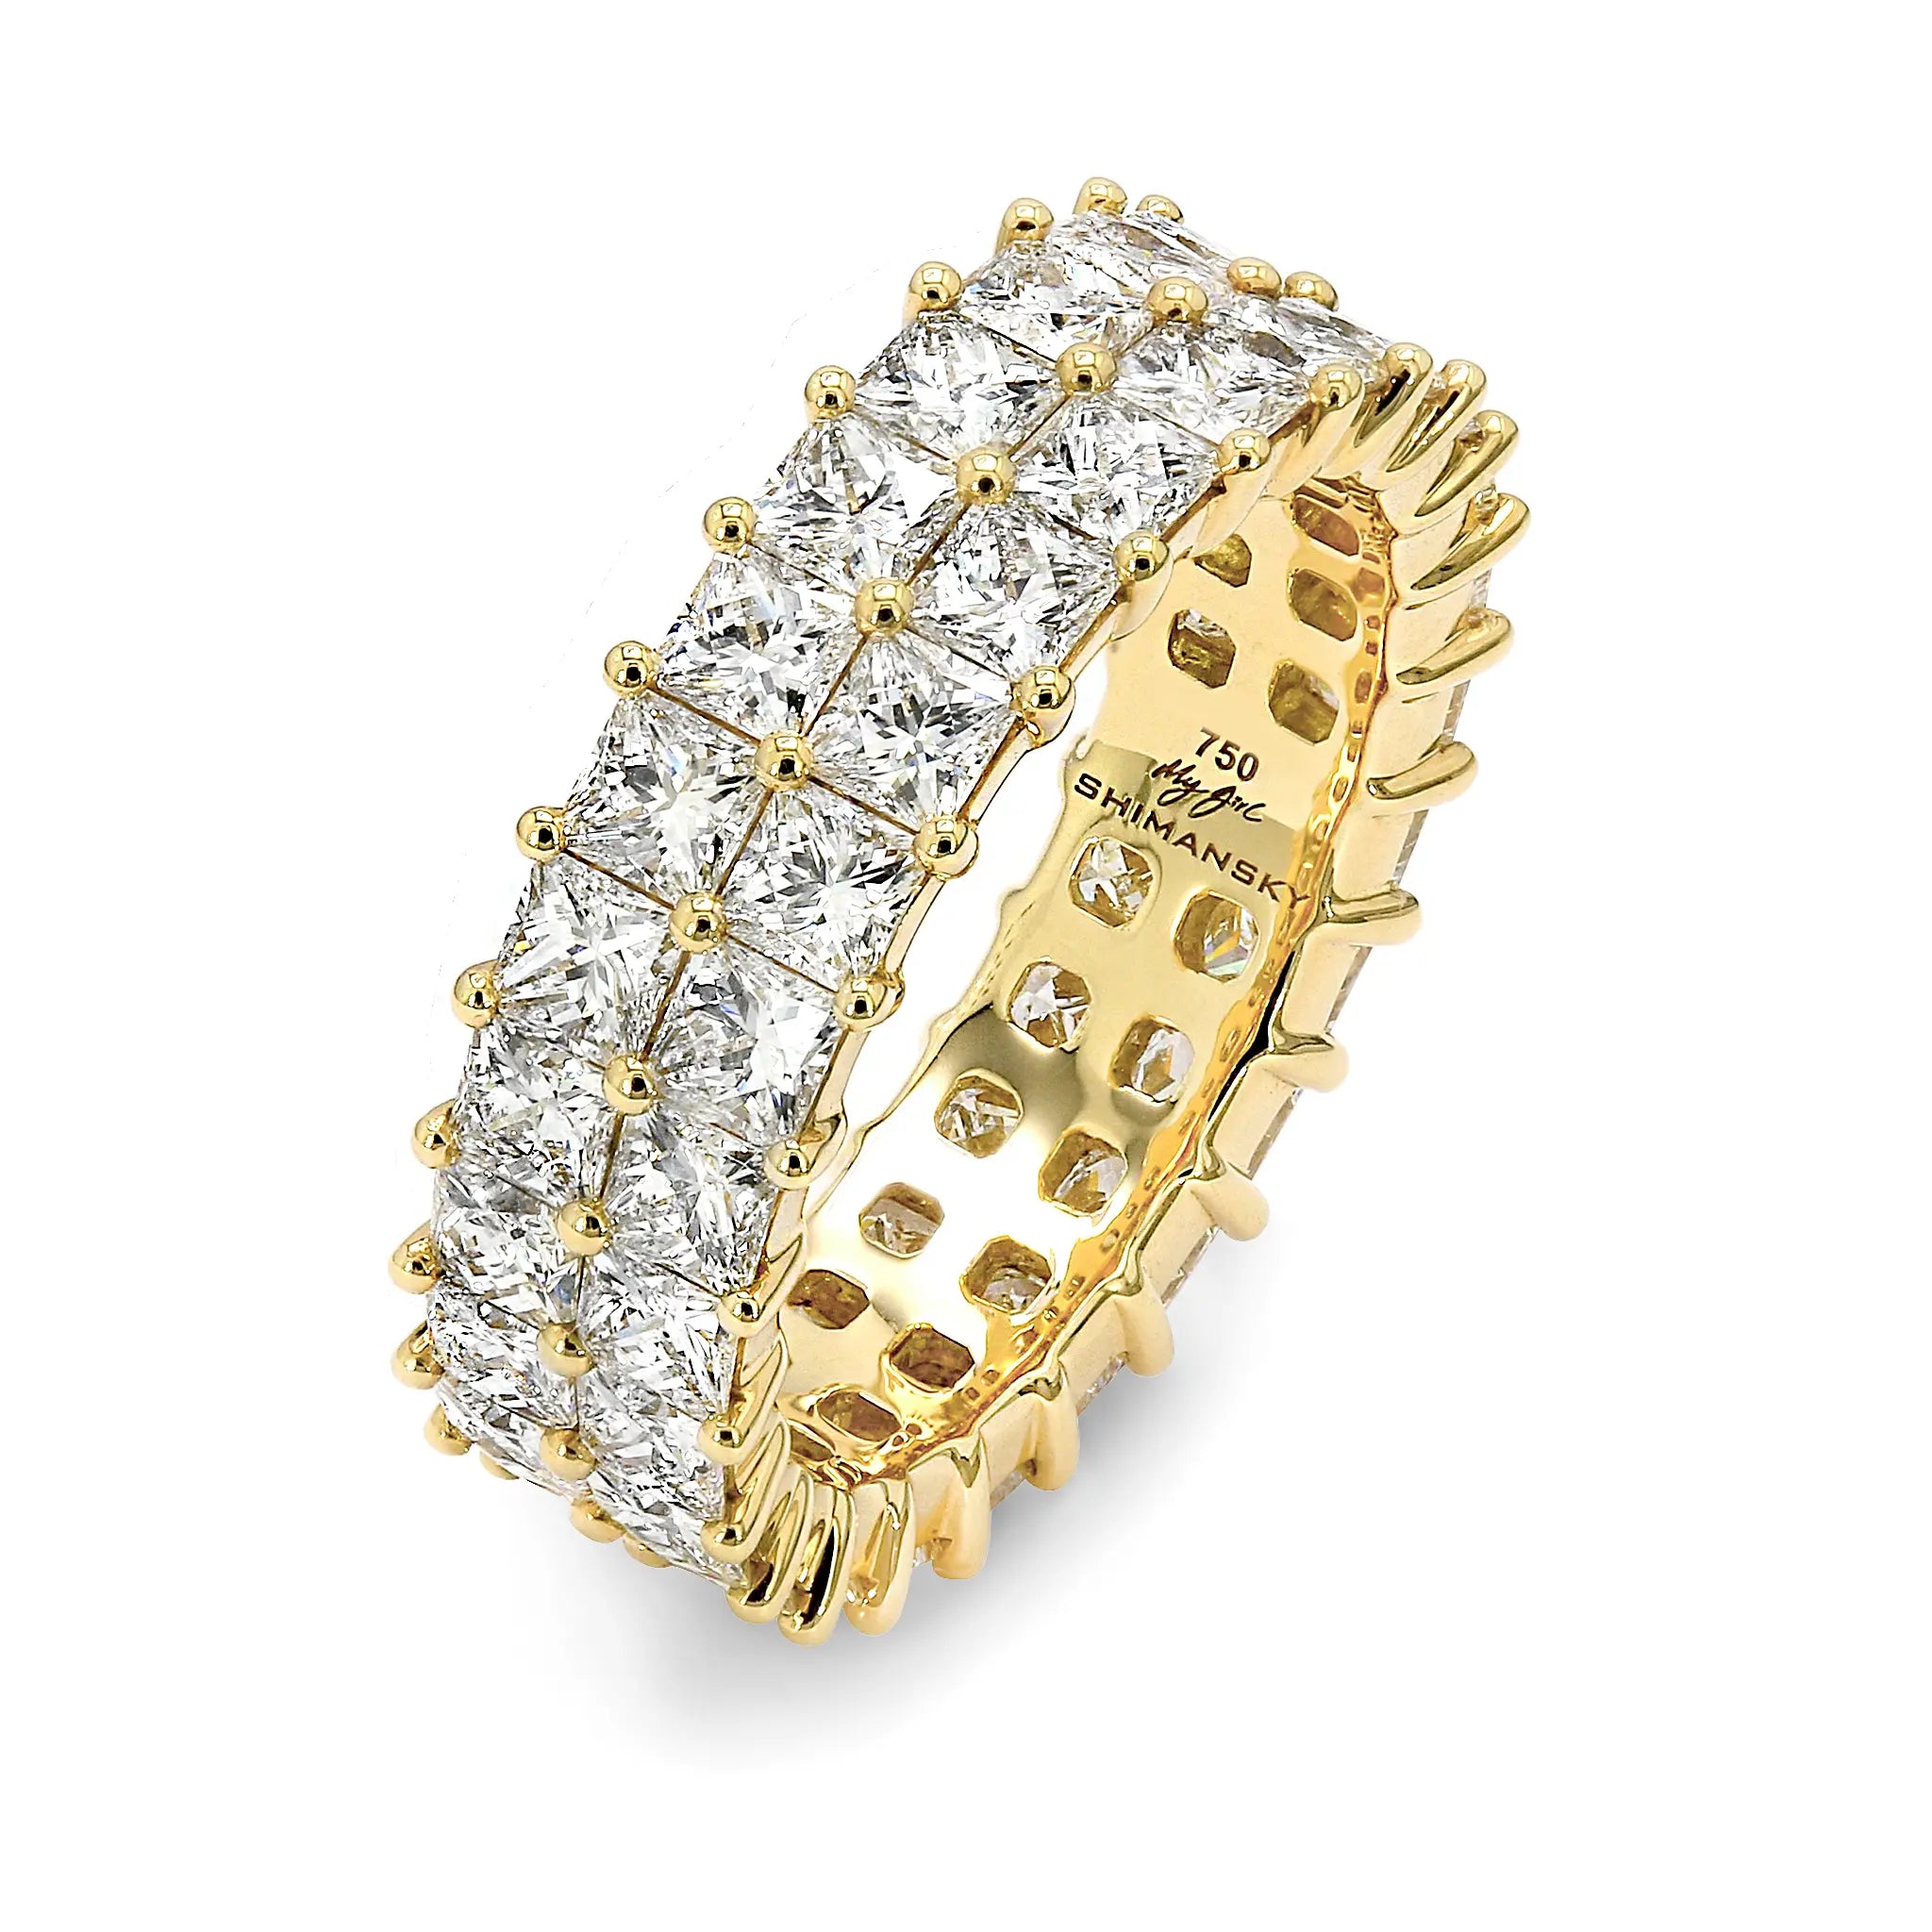 Shimansky - My Girl Claw set 2 Row Full Eternity Diamond Ring 4.20ct Crafted in 18K Yellow Gold